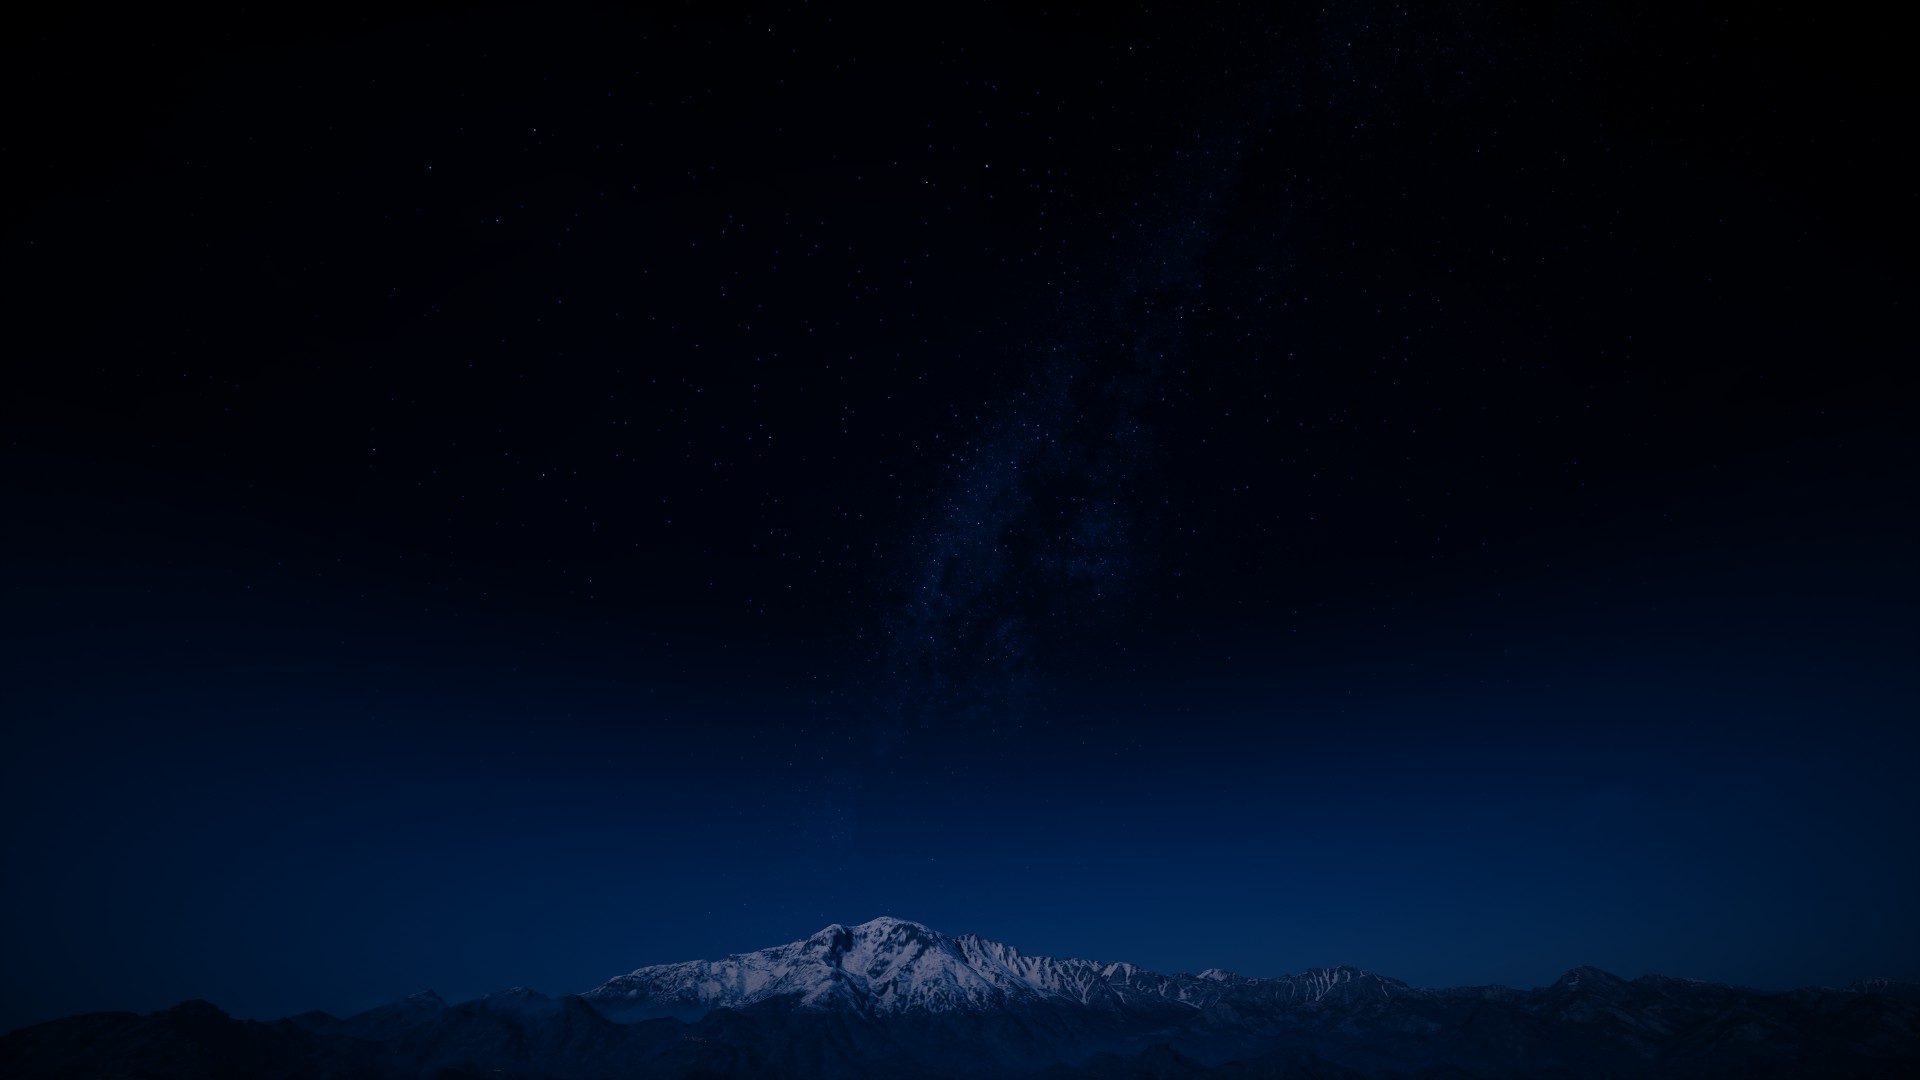 General 1920x1080 Greece landscape stars space mountains night